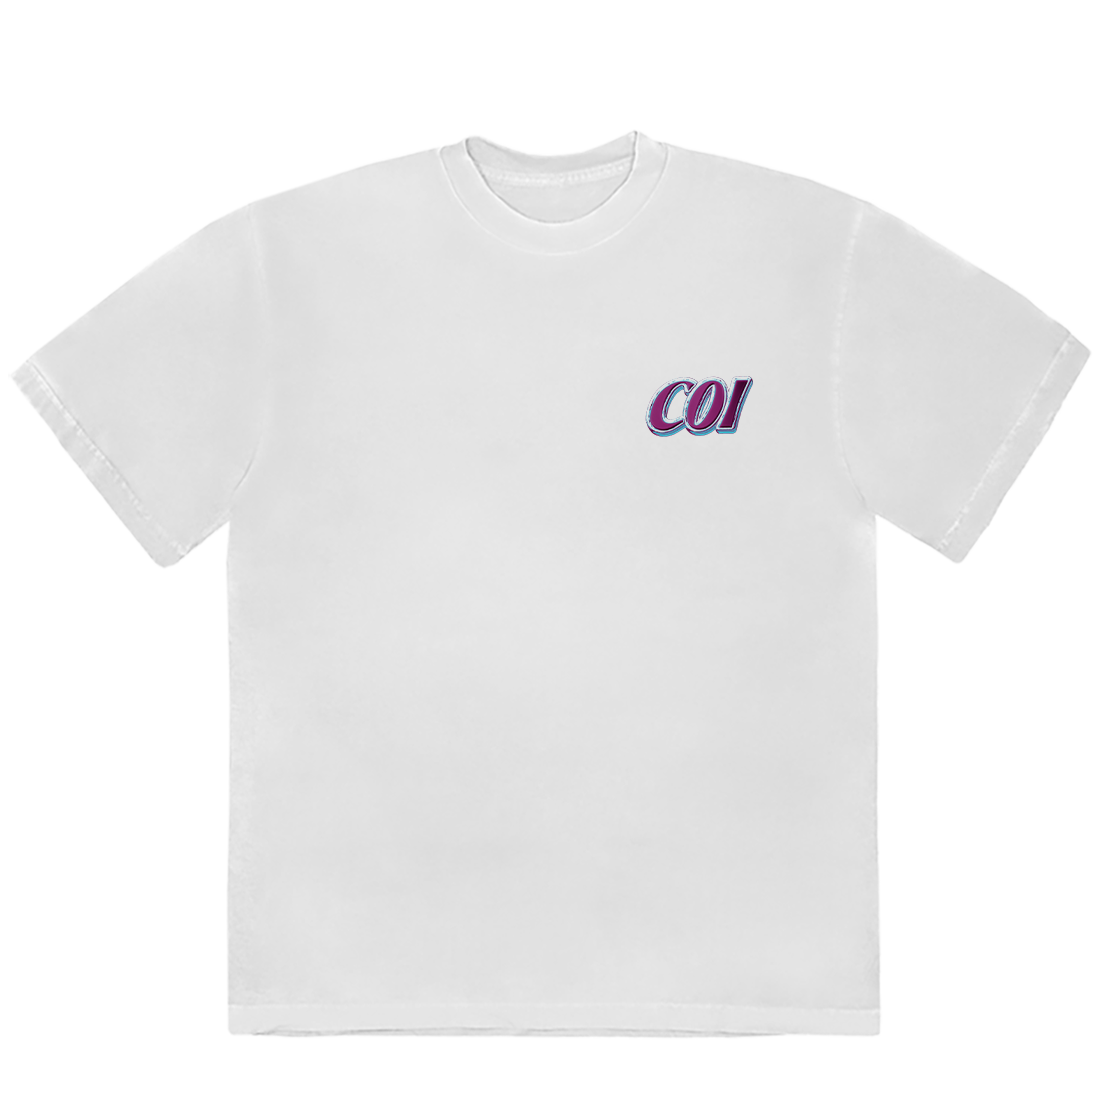 COI T-SHIRT II Front